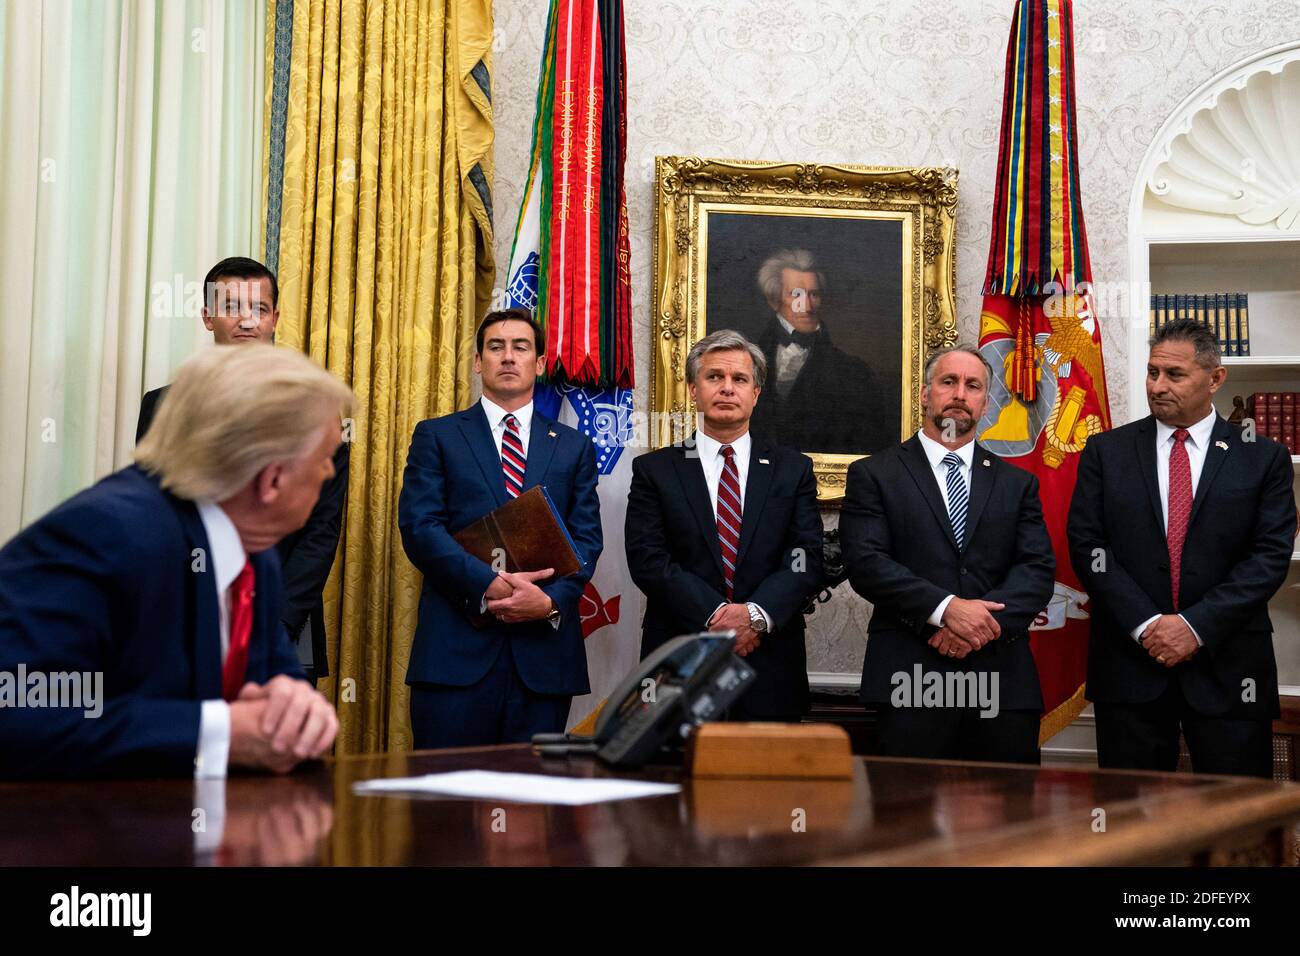 From left to right: Nicholas Trutanich, United States Attorney, District of Nevada, Zachary Terwilliger, United States Attorney, Eastern District of Virginia, Director Christopher Wray, Federal Bureau of Investigation, Matthew Albence, Acting Director, Immigration and Customs Enforcement, Department of Homeland Security, right, and Michael Carvajal, Director of the Federal Bureau of Prisons, look on as President Donald Trump addresses reporters in the Oval Office of the White House after receiving a briefing from law enforcement on 'Keeping American Communities Safe: The Takedown of Key MS-13 Stock Photo